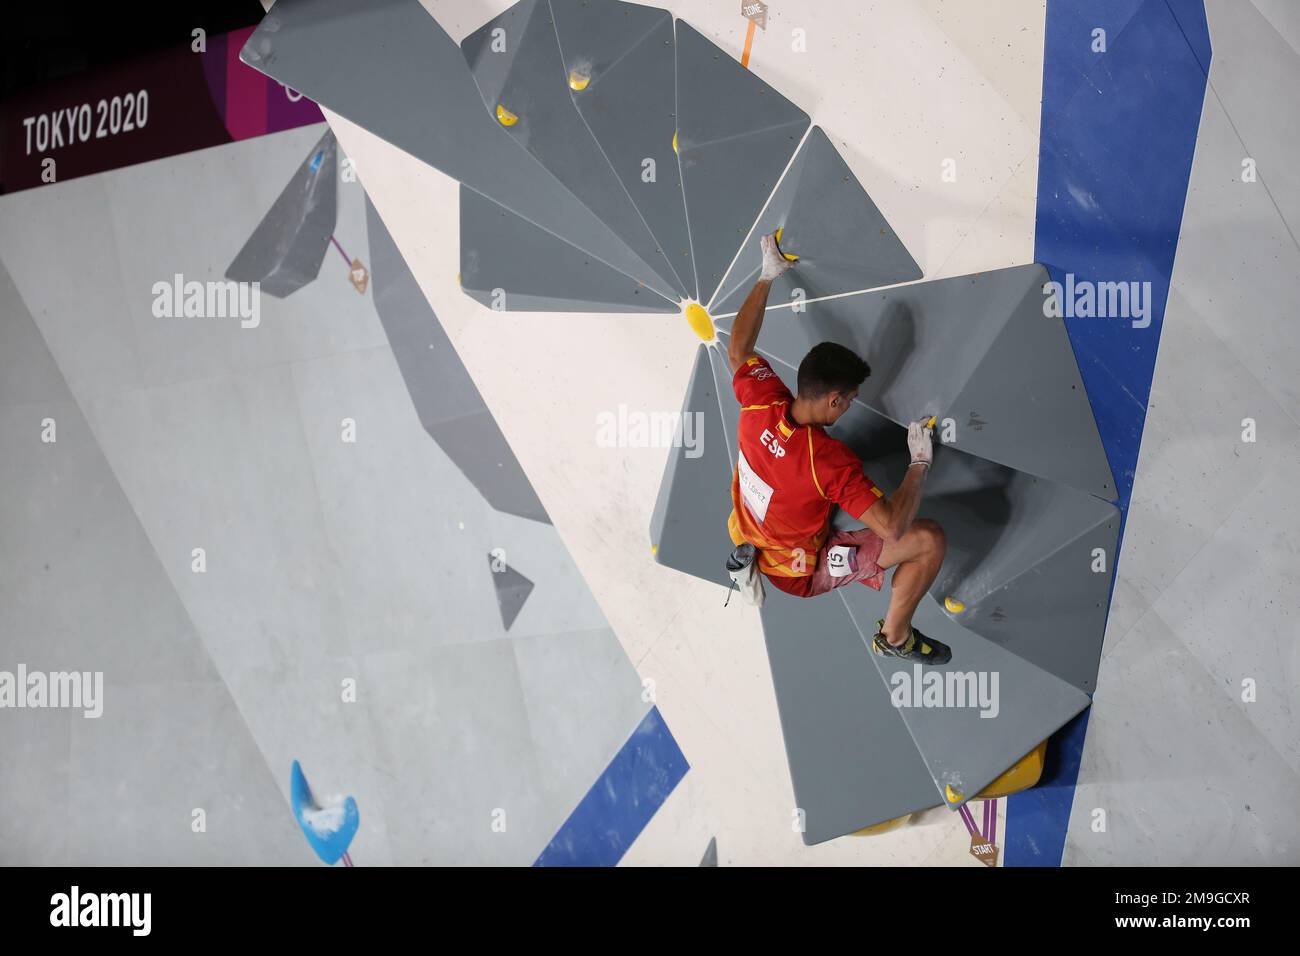 AUG 5, 2021 - TOKYO, JAPAN: Alberto GINES LOPEZ of Spain competes in the Sport Climbing Men's Combined Bouldering Final at the Tokyo 2020 Olympic Game Stock Photo